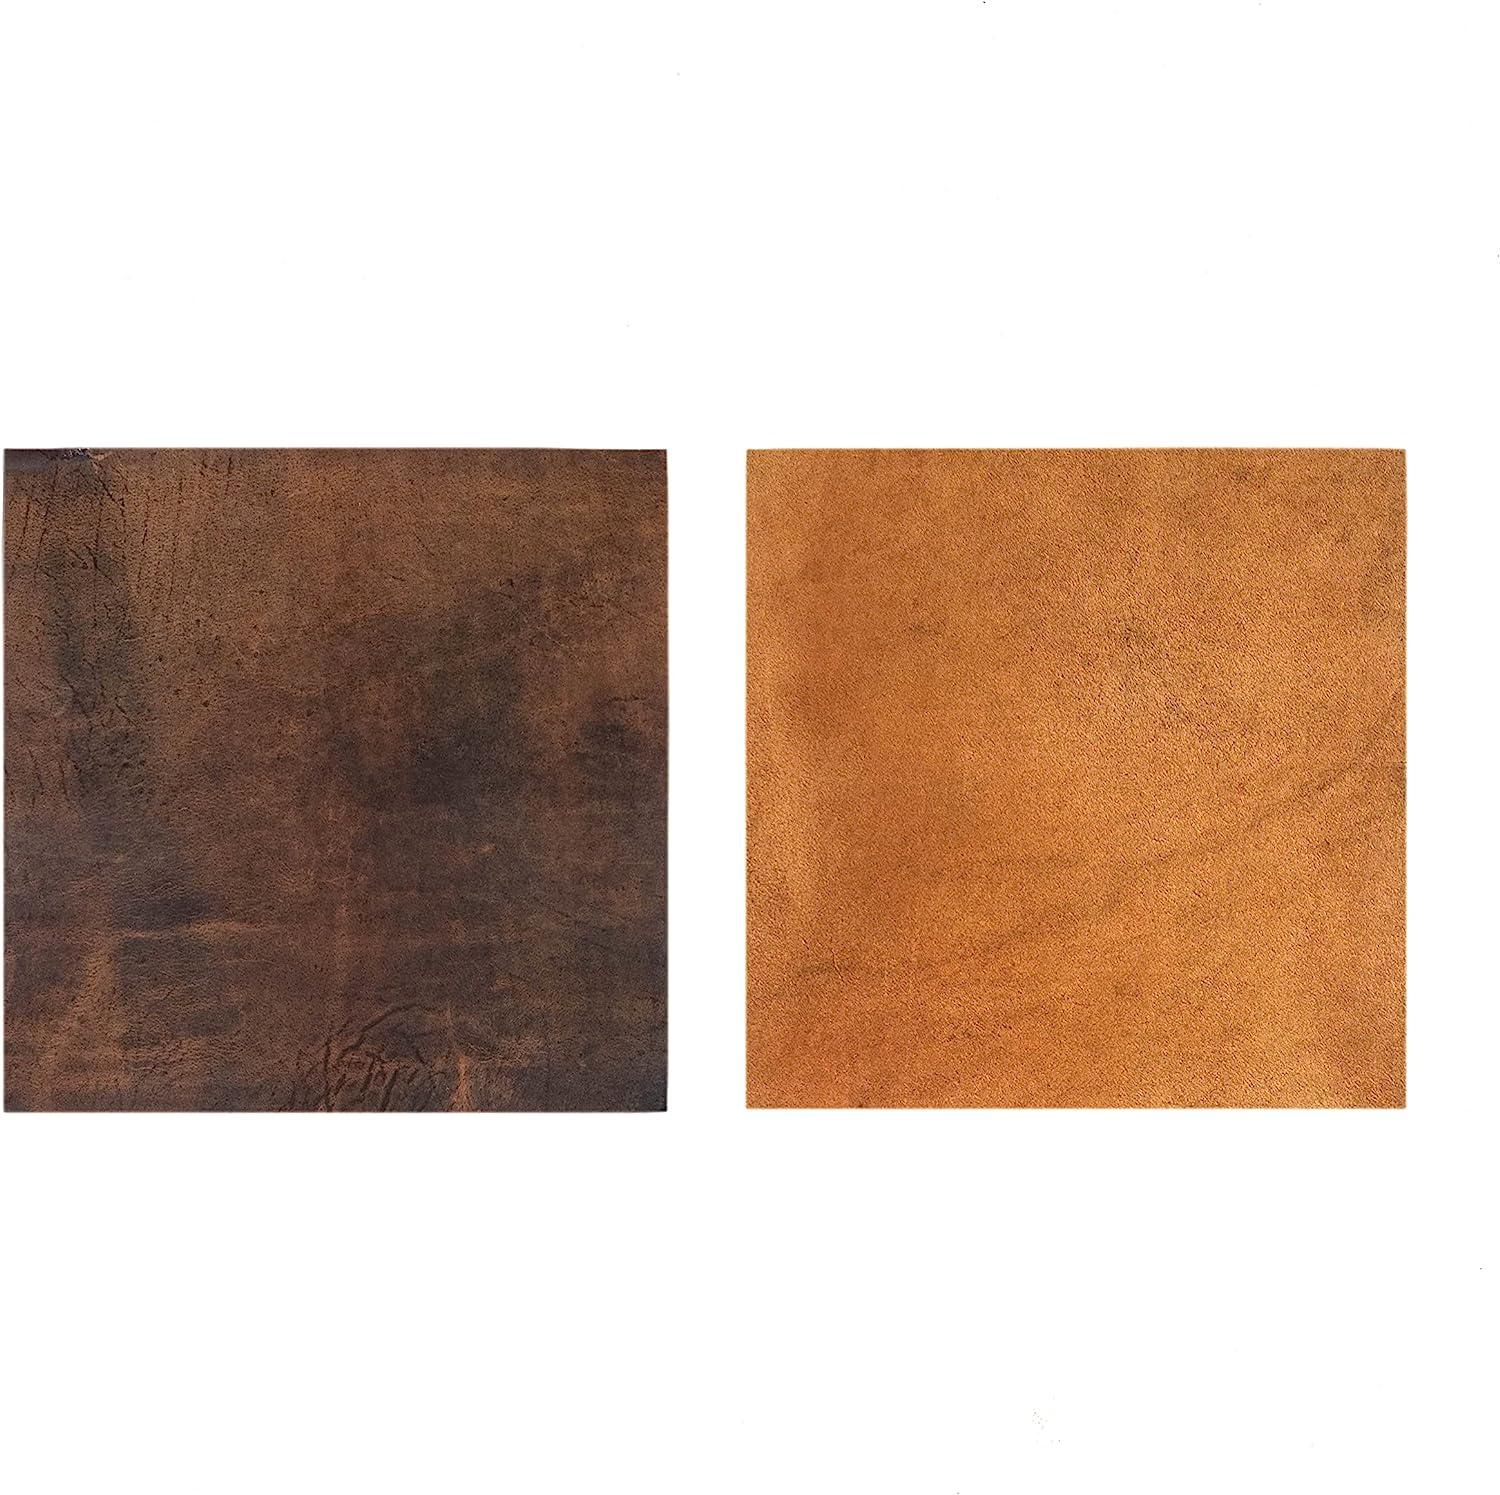 KEHLDMENG 12 x 24 Genuine Leather Pieces / 10 SF Leather Sheets for  Leather Working/Random Colours (5 pc)